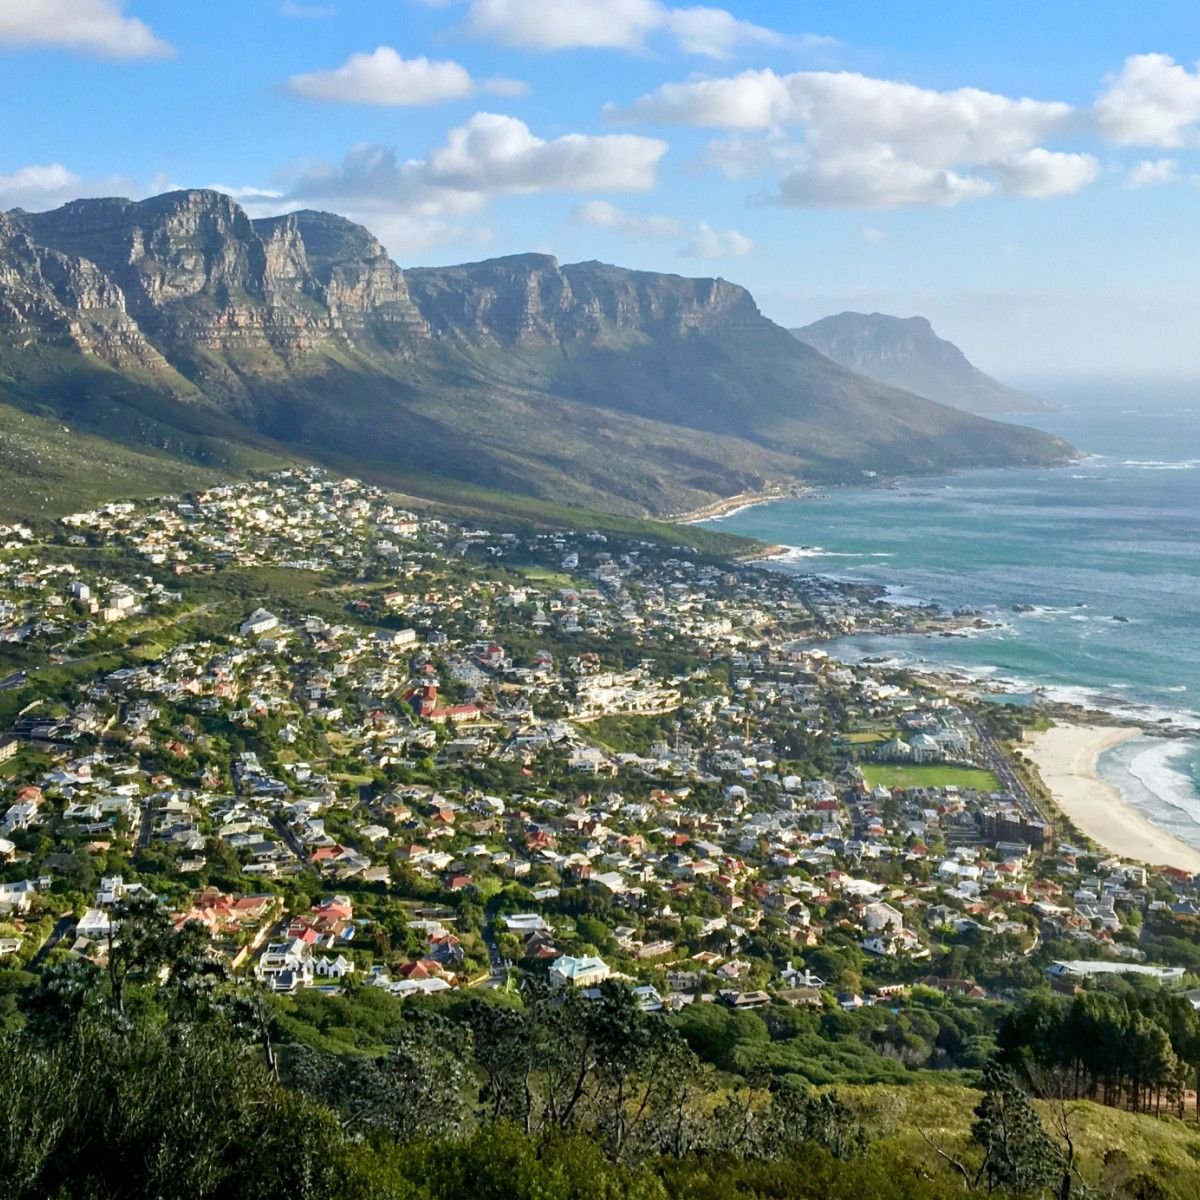 Historical Landmarks to See in South Africa